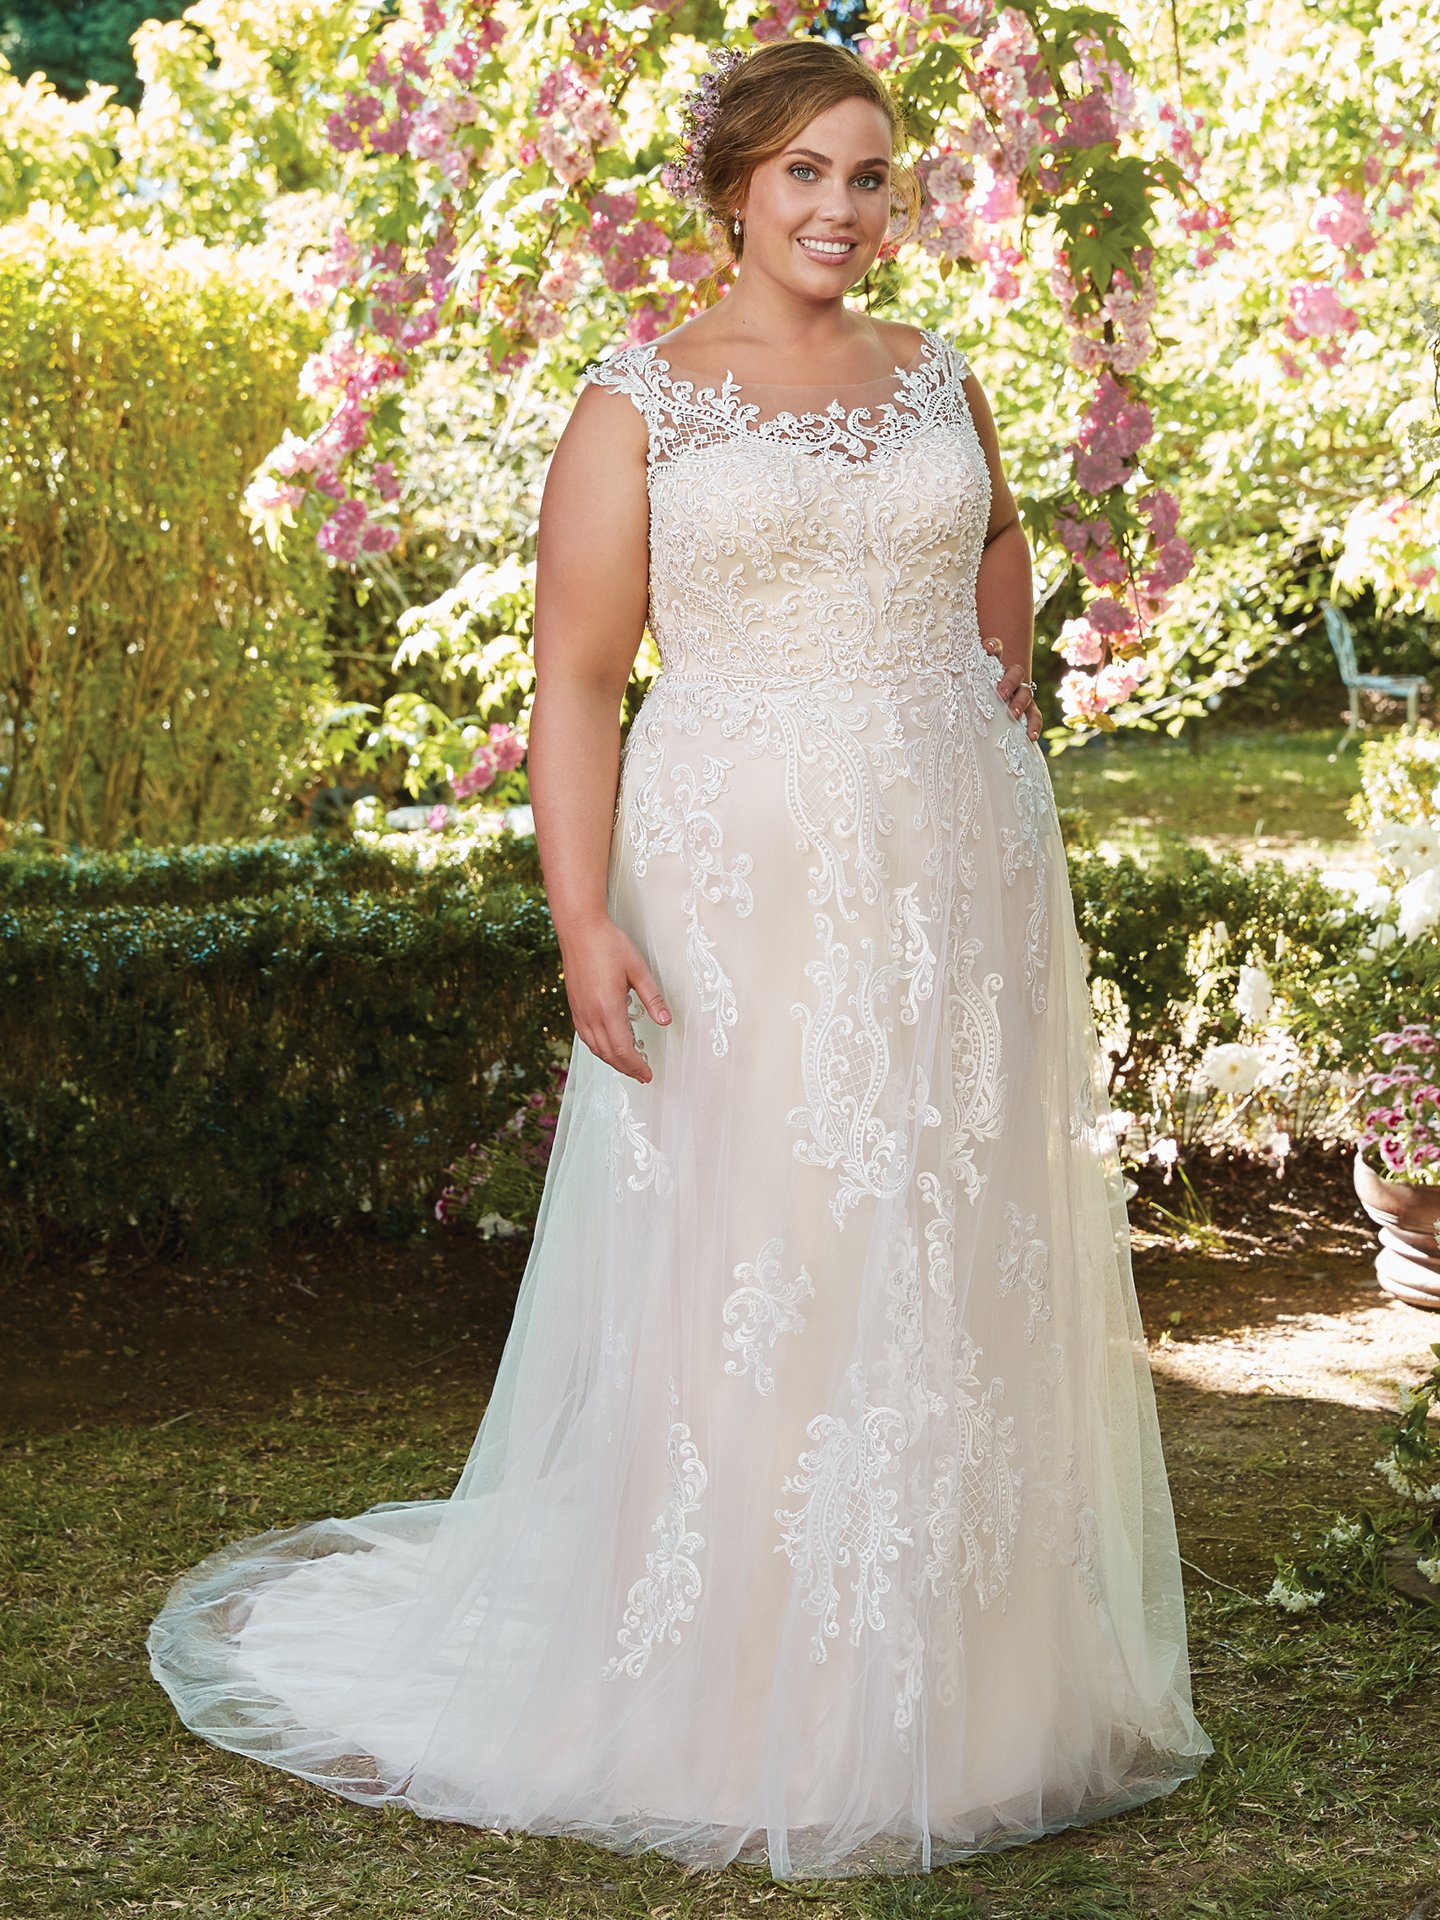 Alexis by Rebecca Ingram. This flirty A-line wedding gown features distinctive crosshatch motifs embellished with Swarovski crystals, delicate beading, and sequins. Illusion details accented in lace appliqués create beautiful back interest. Finished with covered buttons over zipper closure.